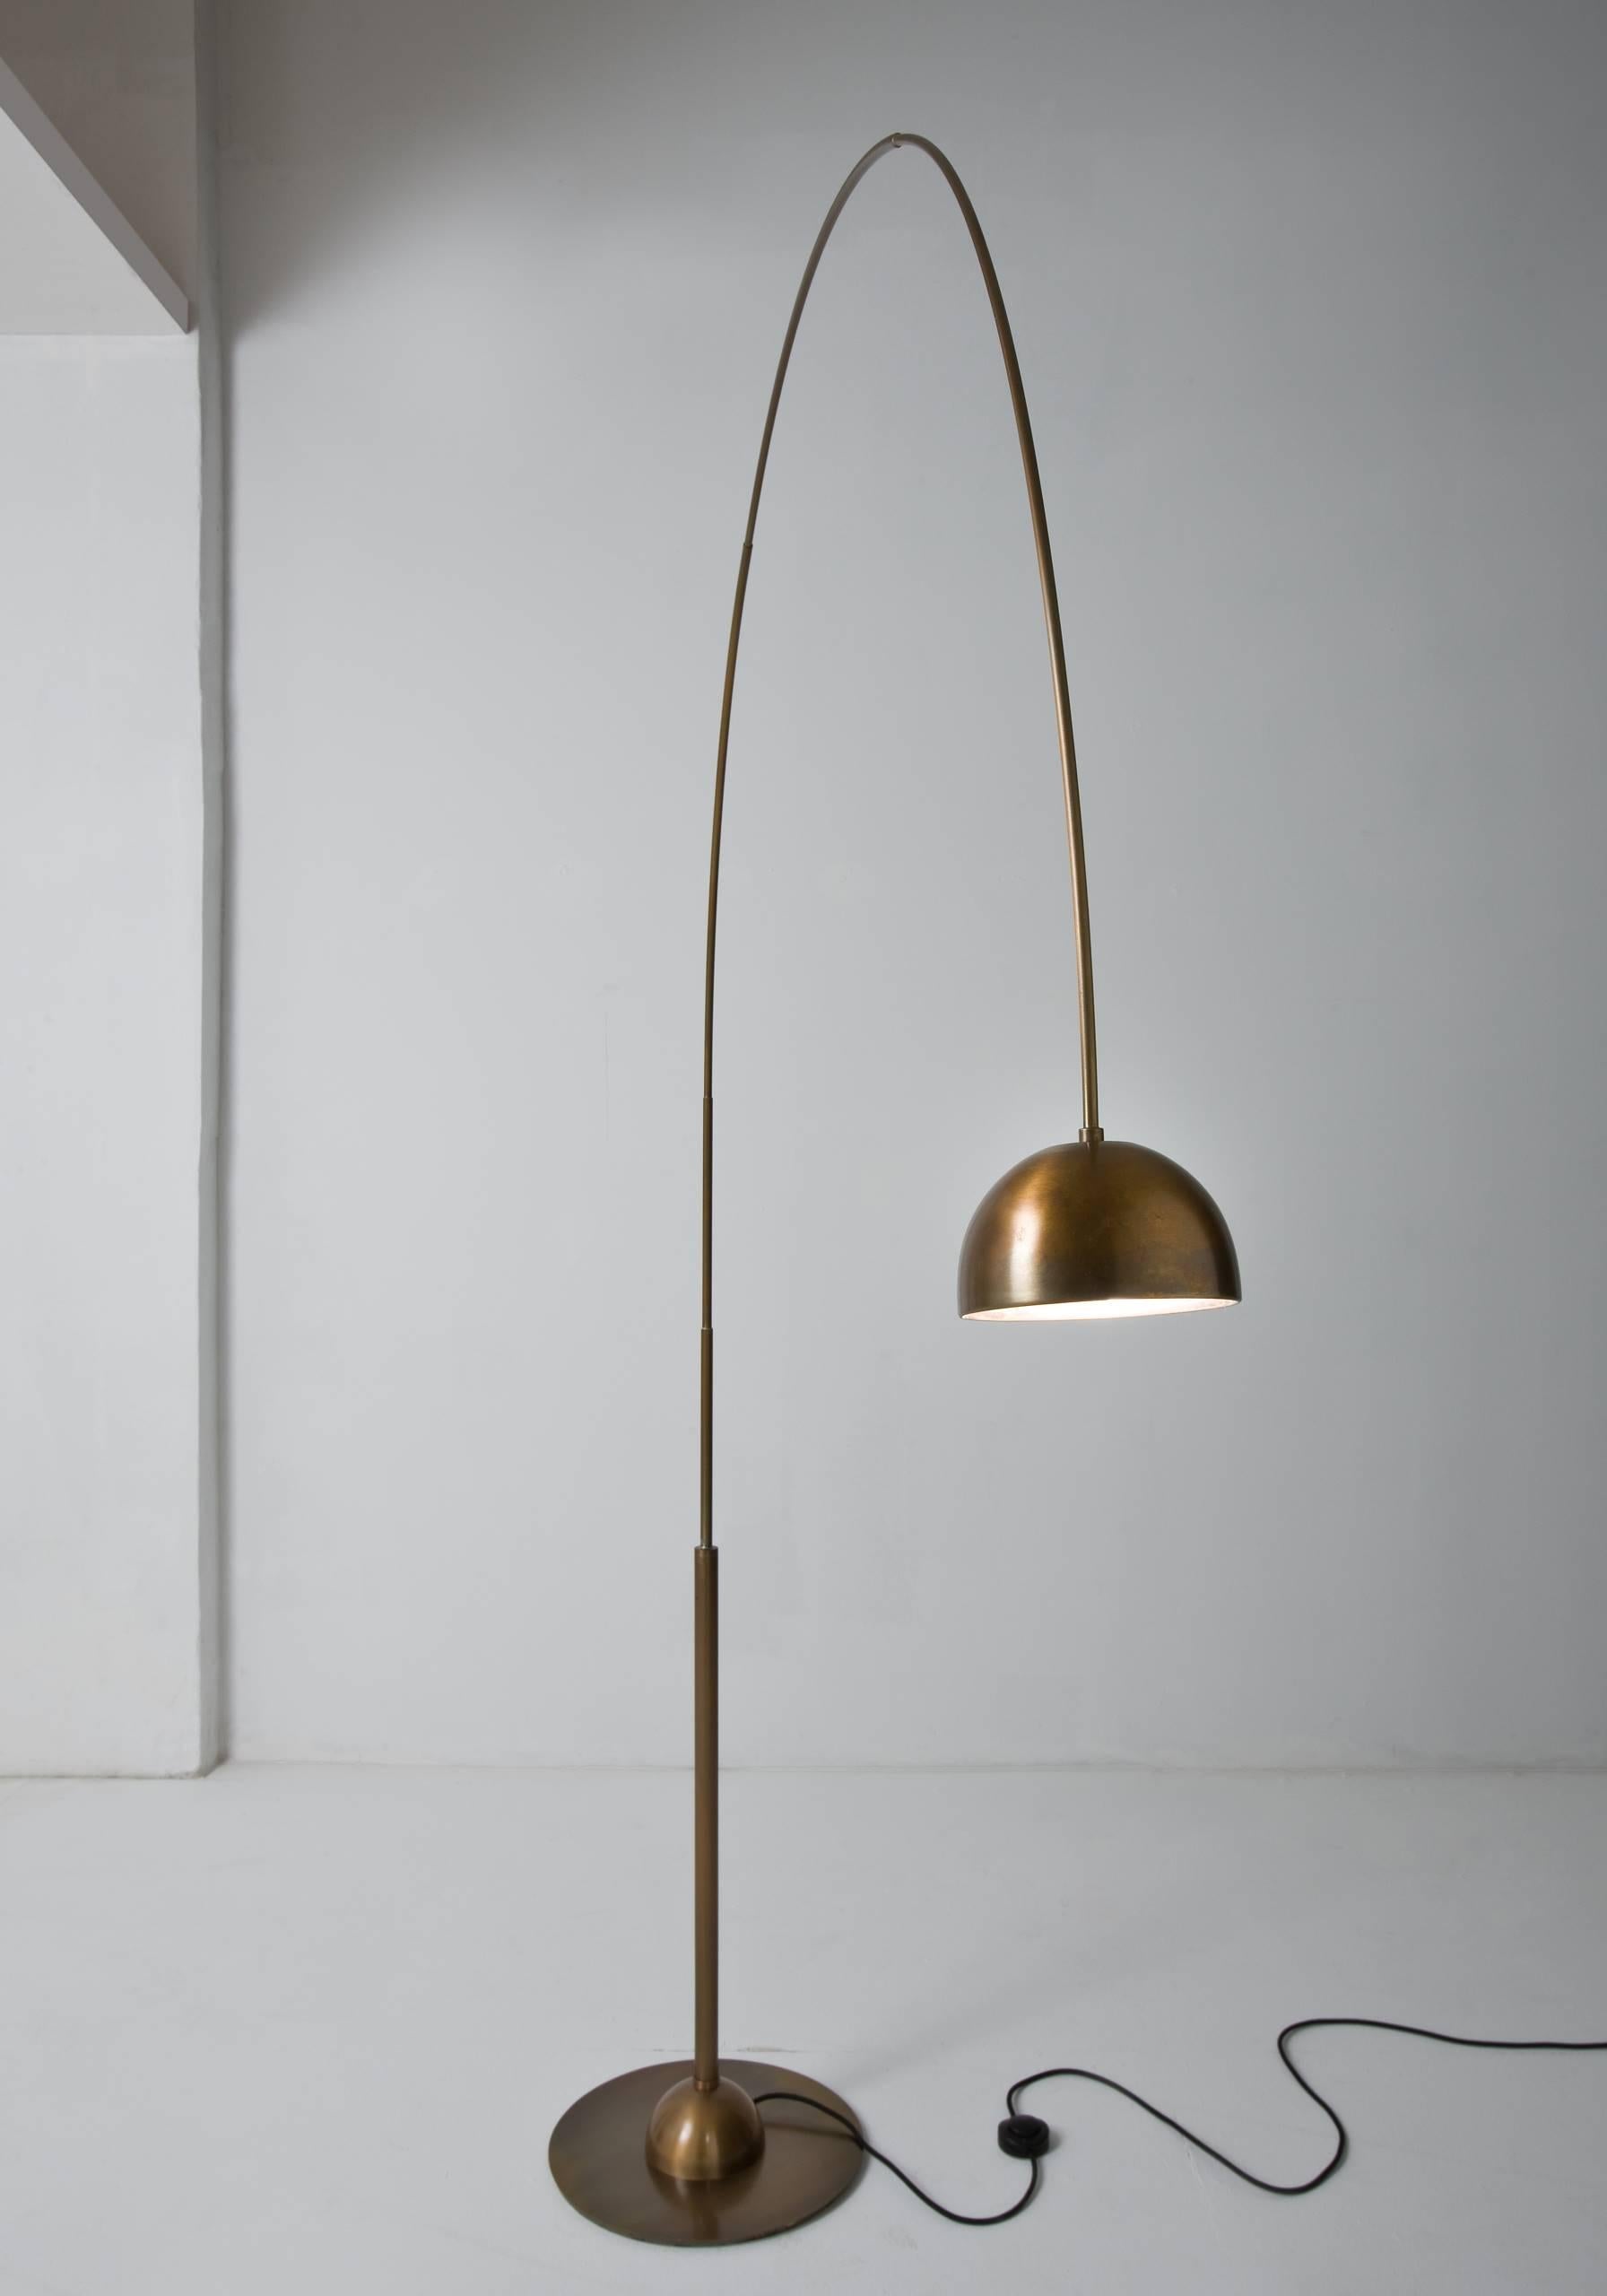 Rotating floor lamp in dark oxidized burnished brass with a double-plug LED bulb.

FINISH:
Burnished brass

The simple, refined and at the same time modern and creative design, is combined with the unique and original touch given by the hands of our